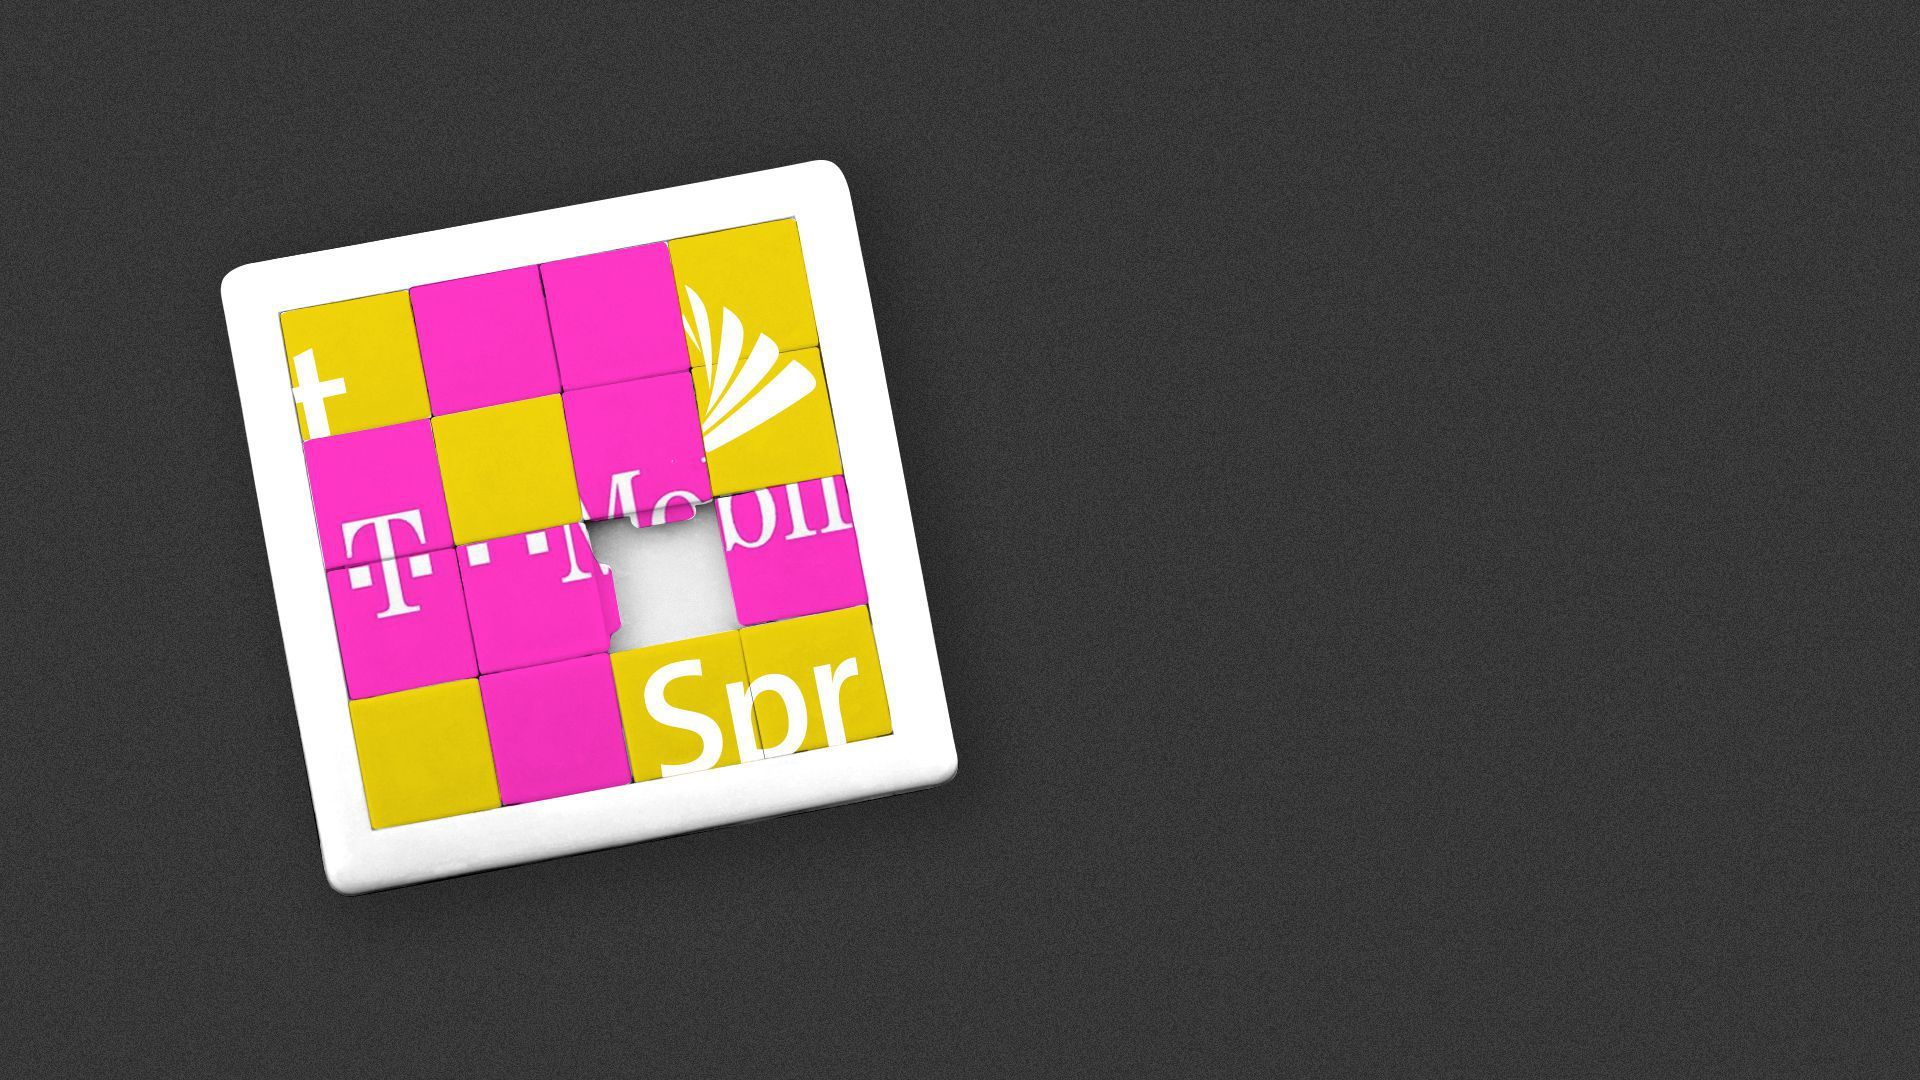 An illustration of a puzzle combining the Sprint and T-Mobile logos